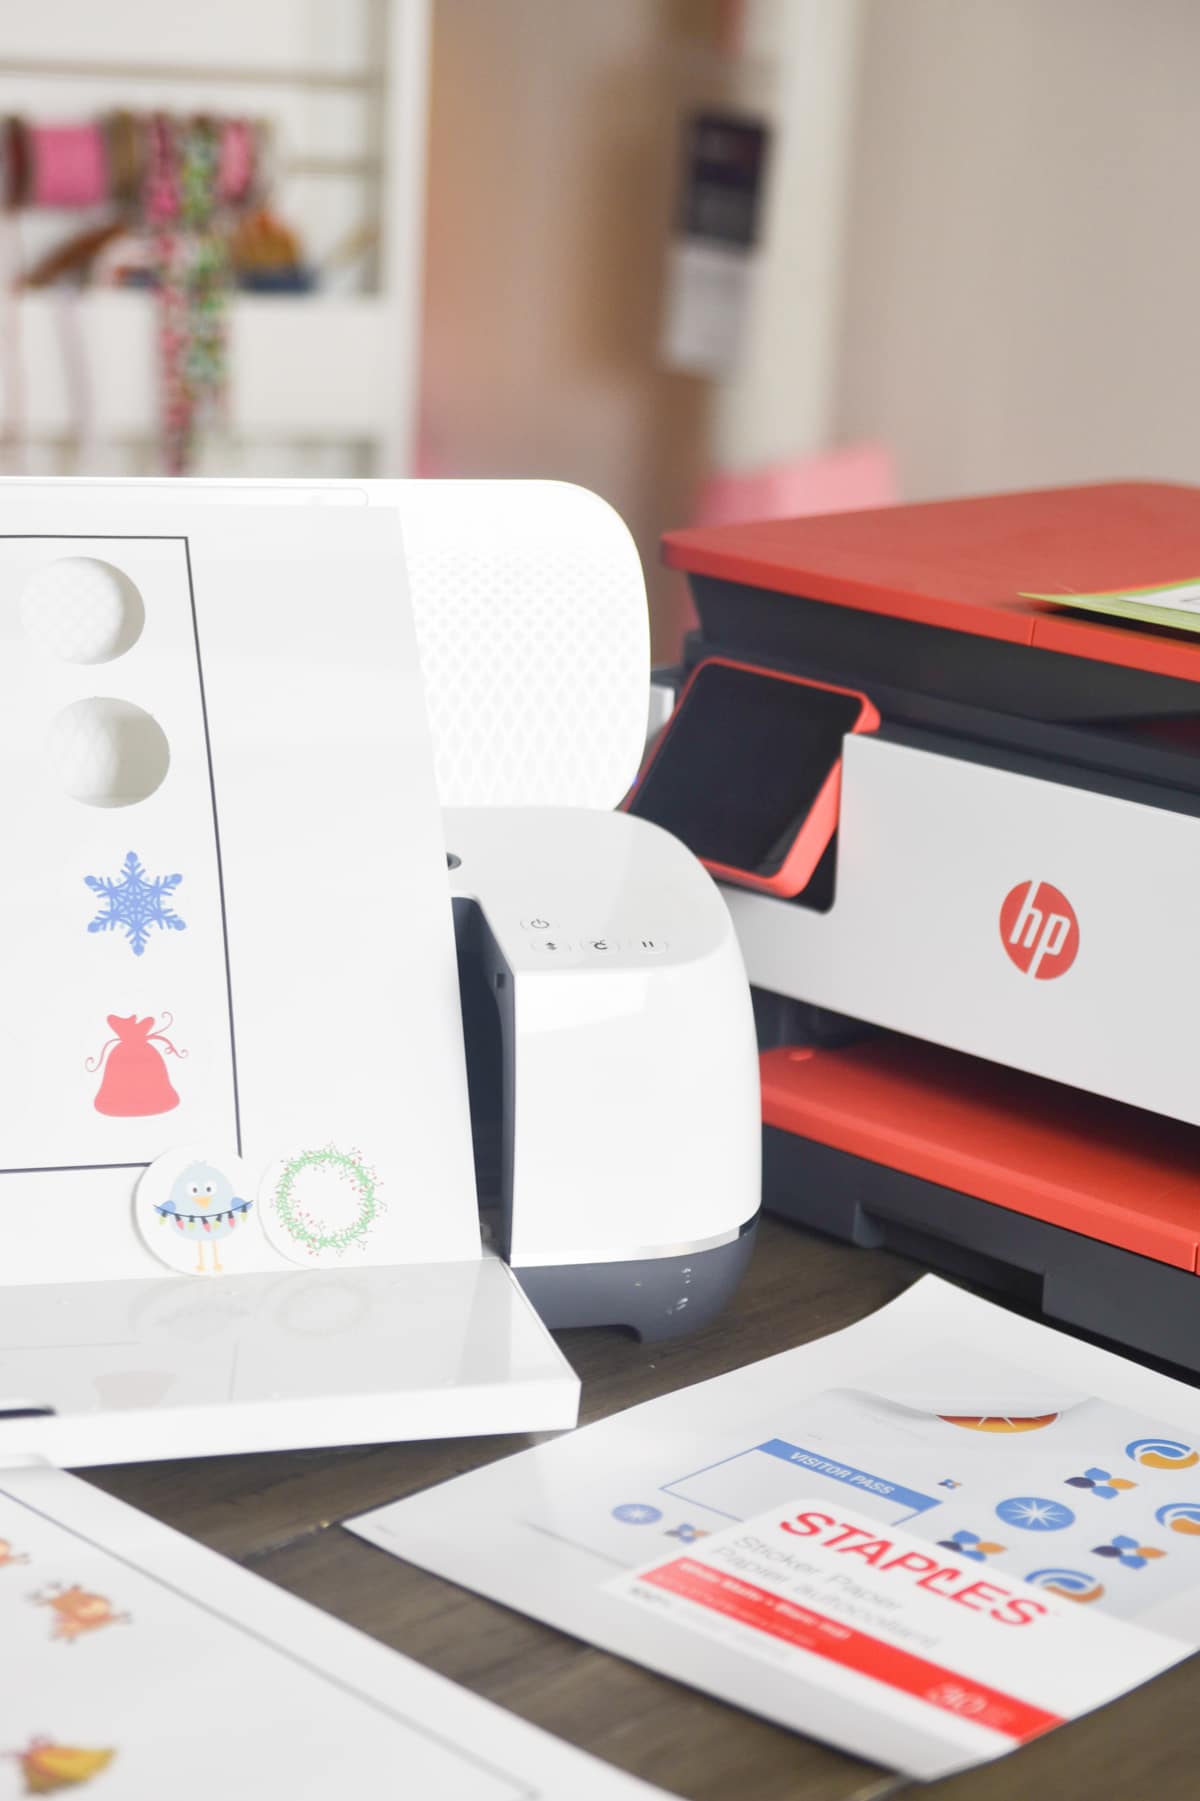 Ultimate guide to Cricut materials from vinyl to infusible ink